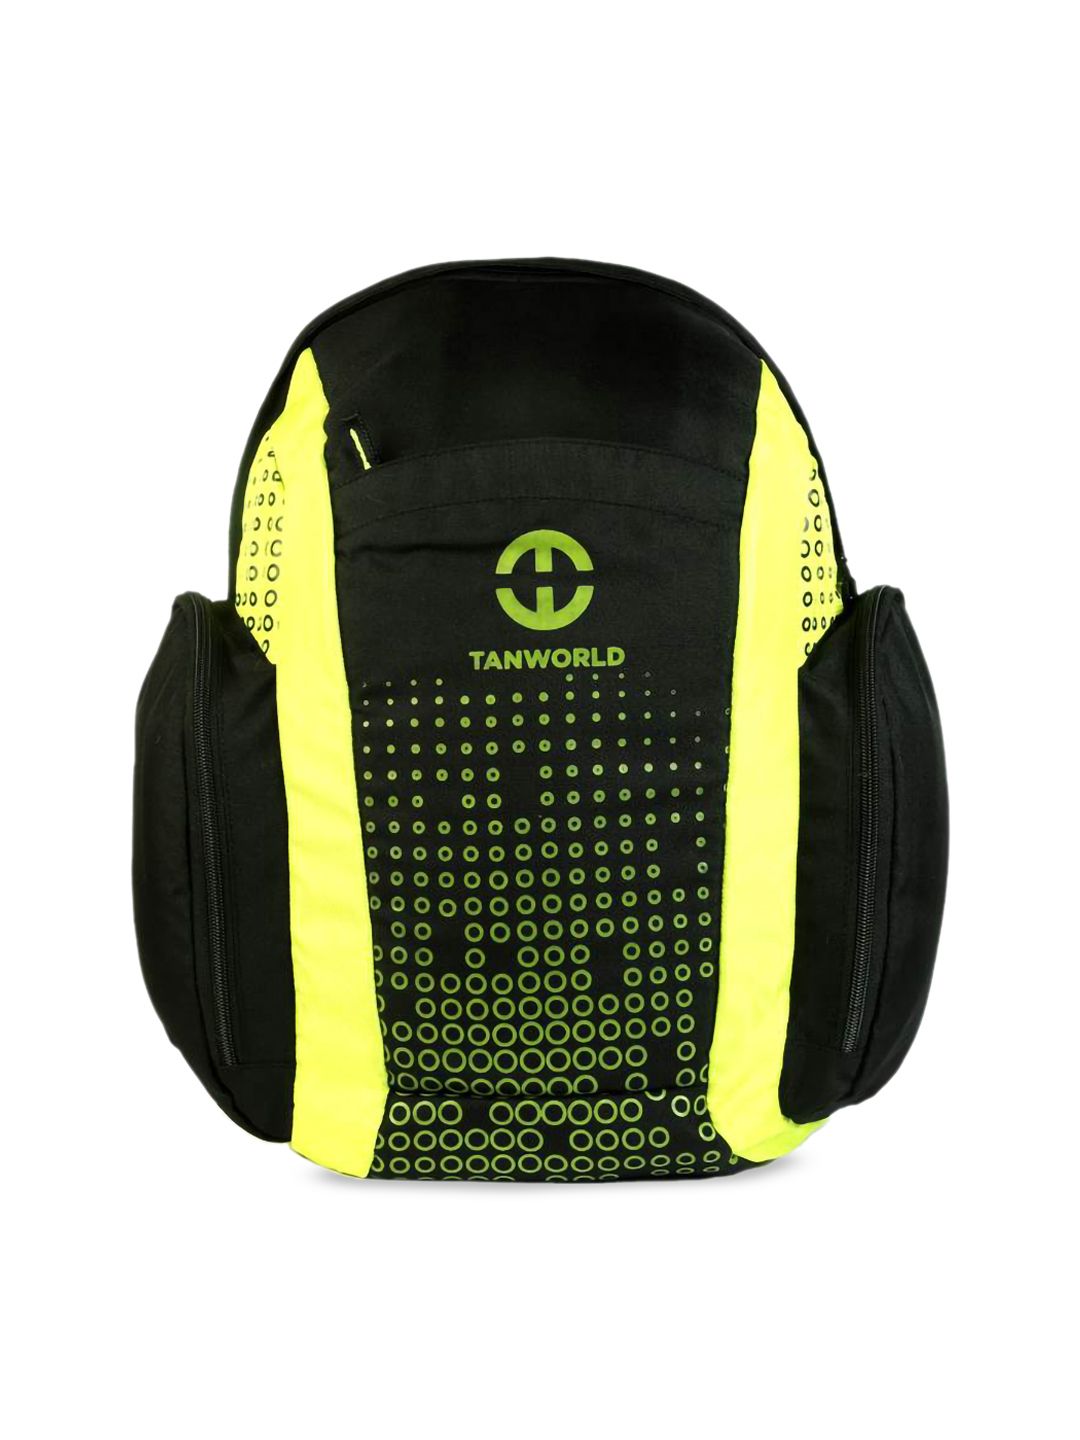 TAN WORLD Unisex Black & Yellow Colourblocked Laptop Backpack Price in India